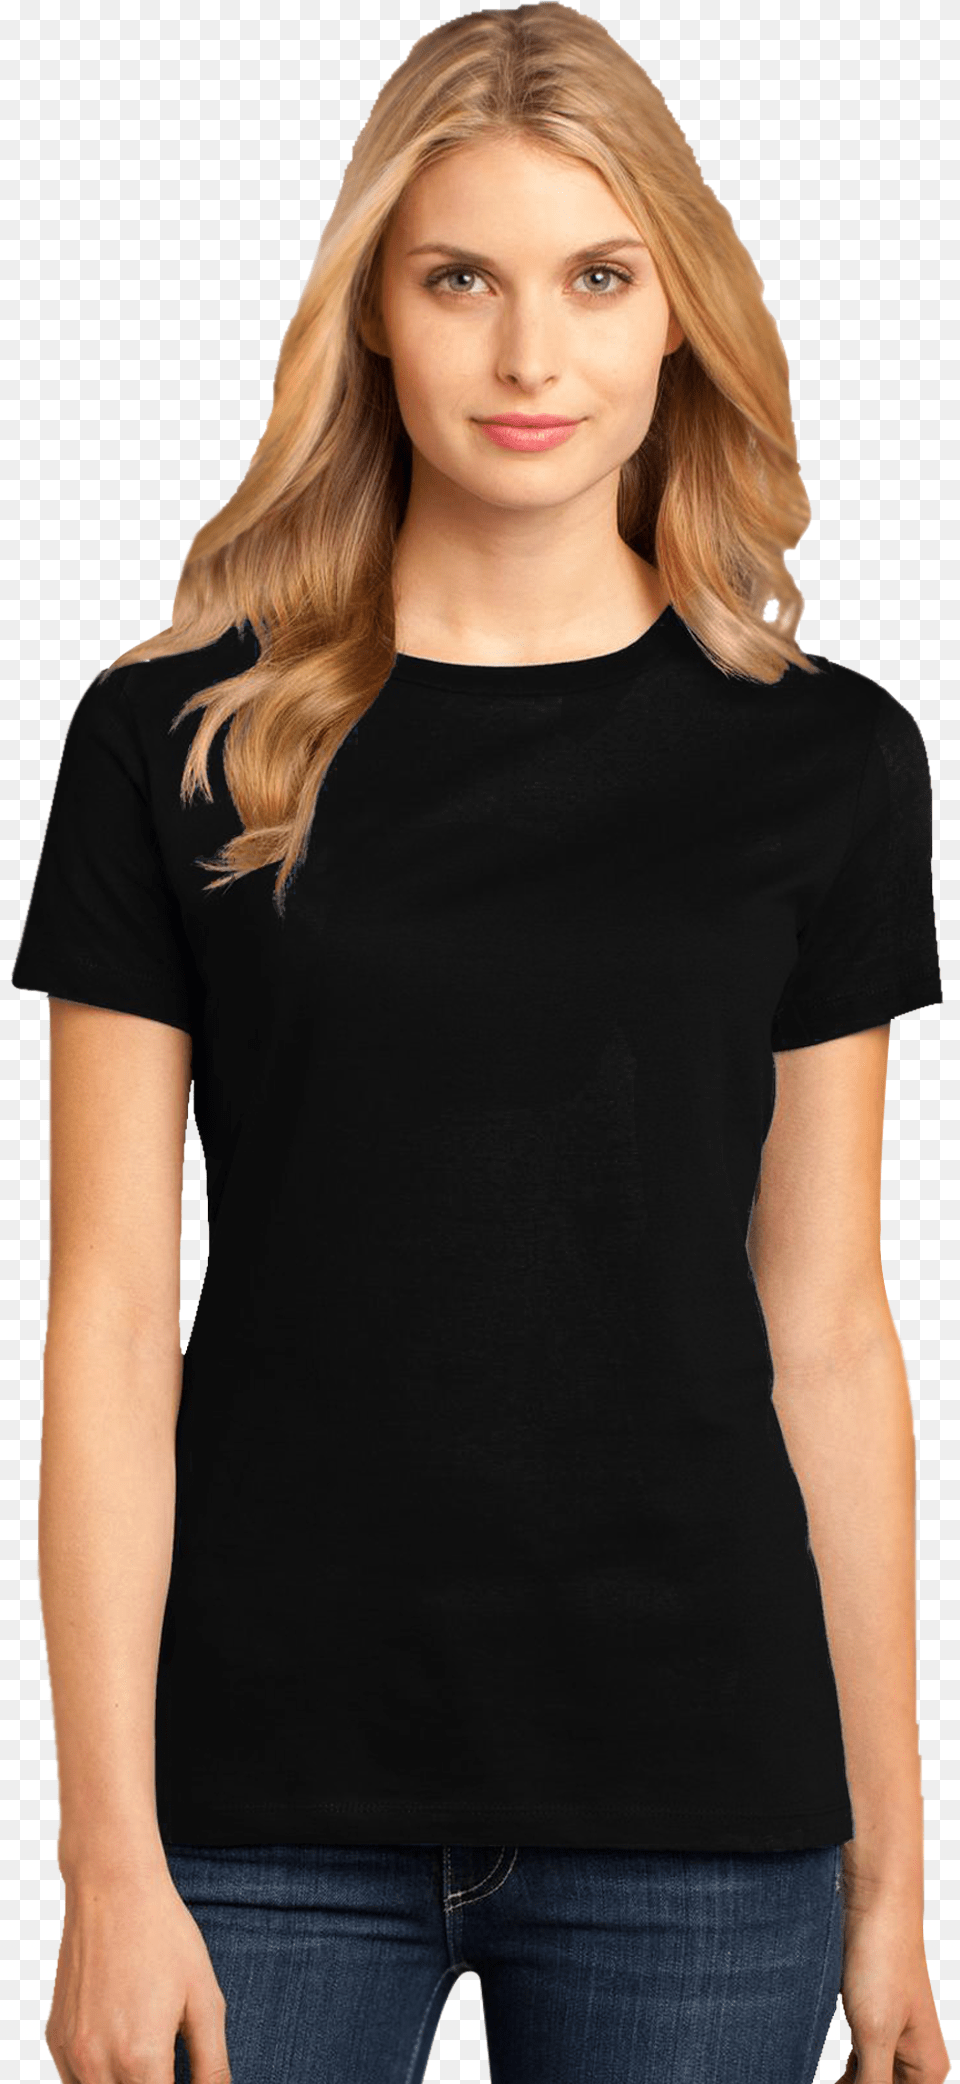 B Women39s Empowering Message T Shirts, Blouse, Clothing, T-shirt, Adult Free Transparent Png